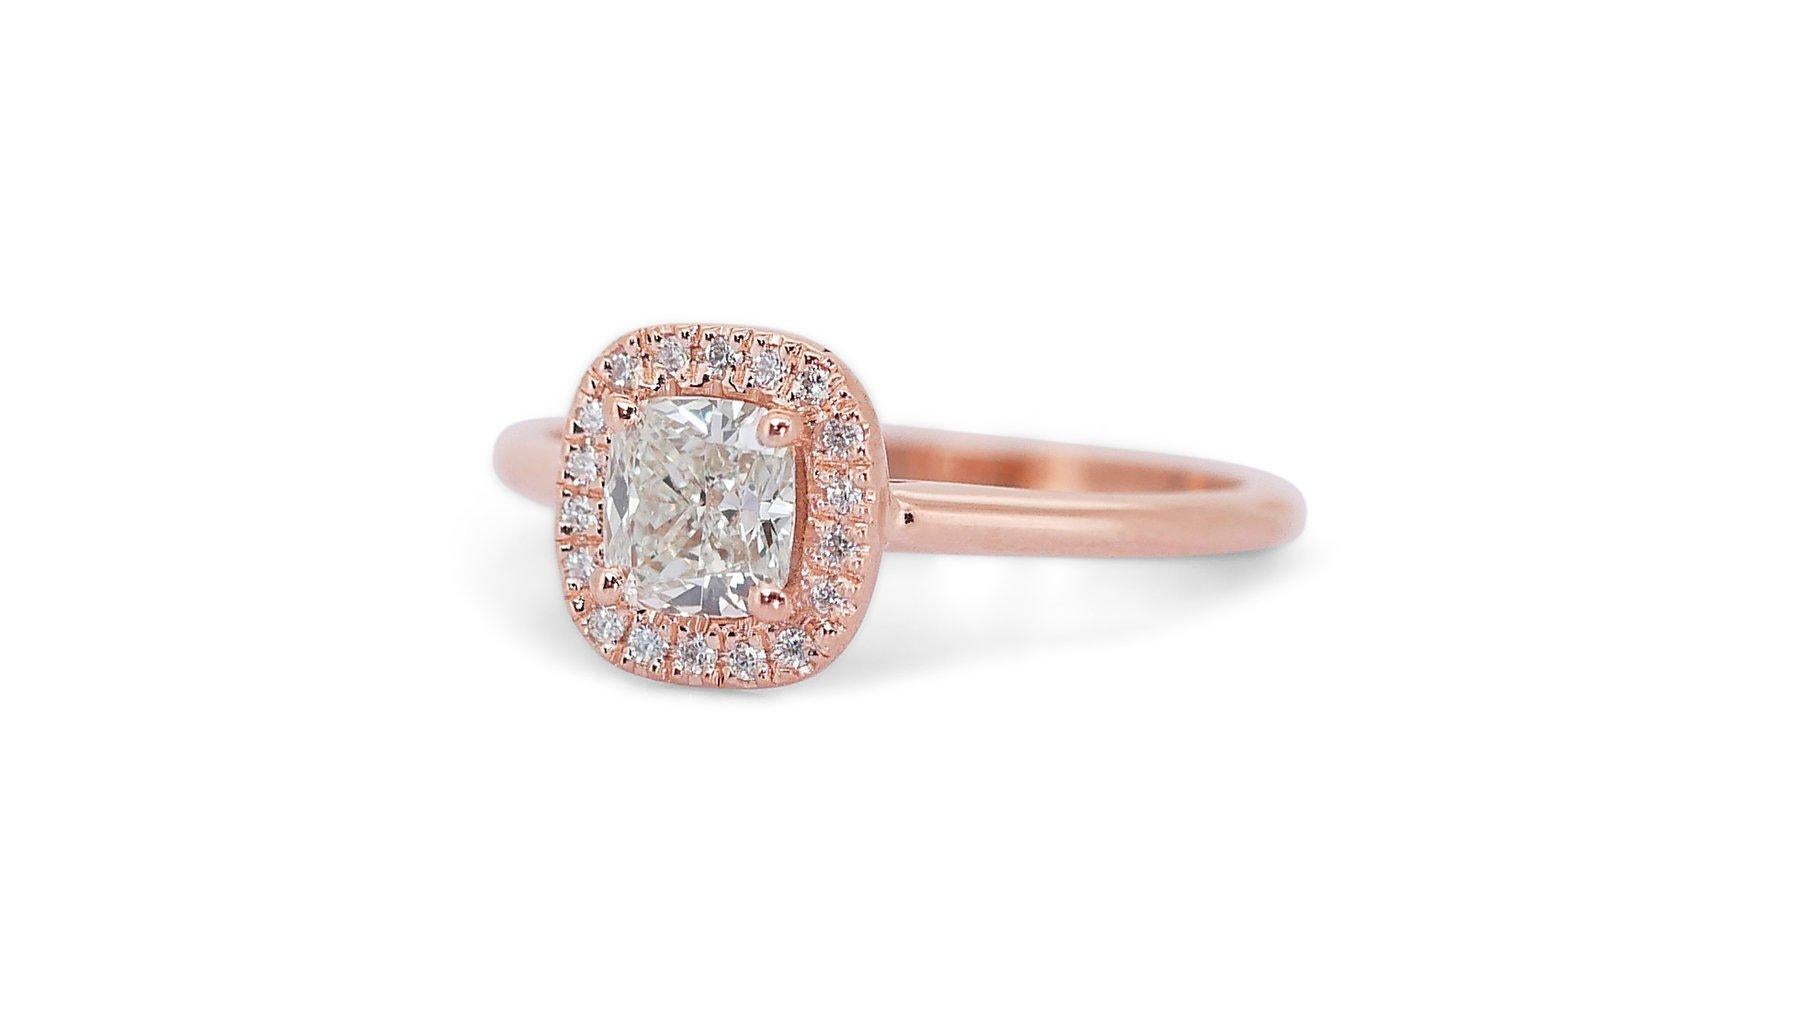 Cushion Cut Gorgeous 1.60ct Diamonds Halo Ring in 18k Rose Gold - GIA Certified For Sale